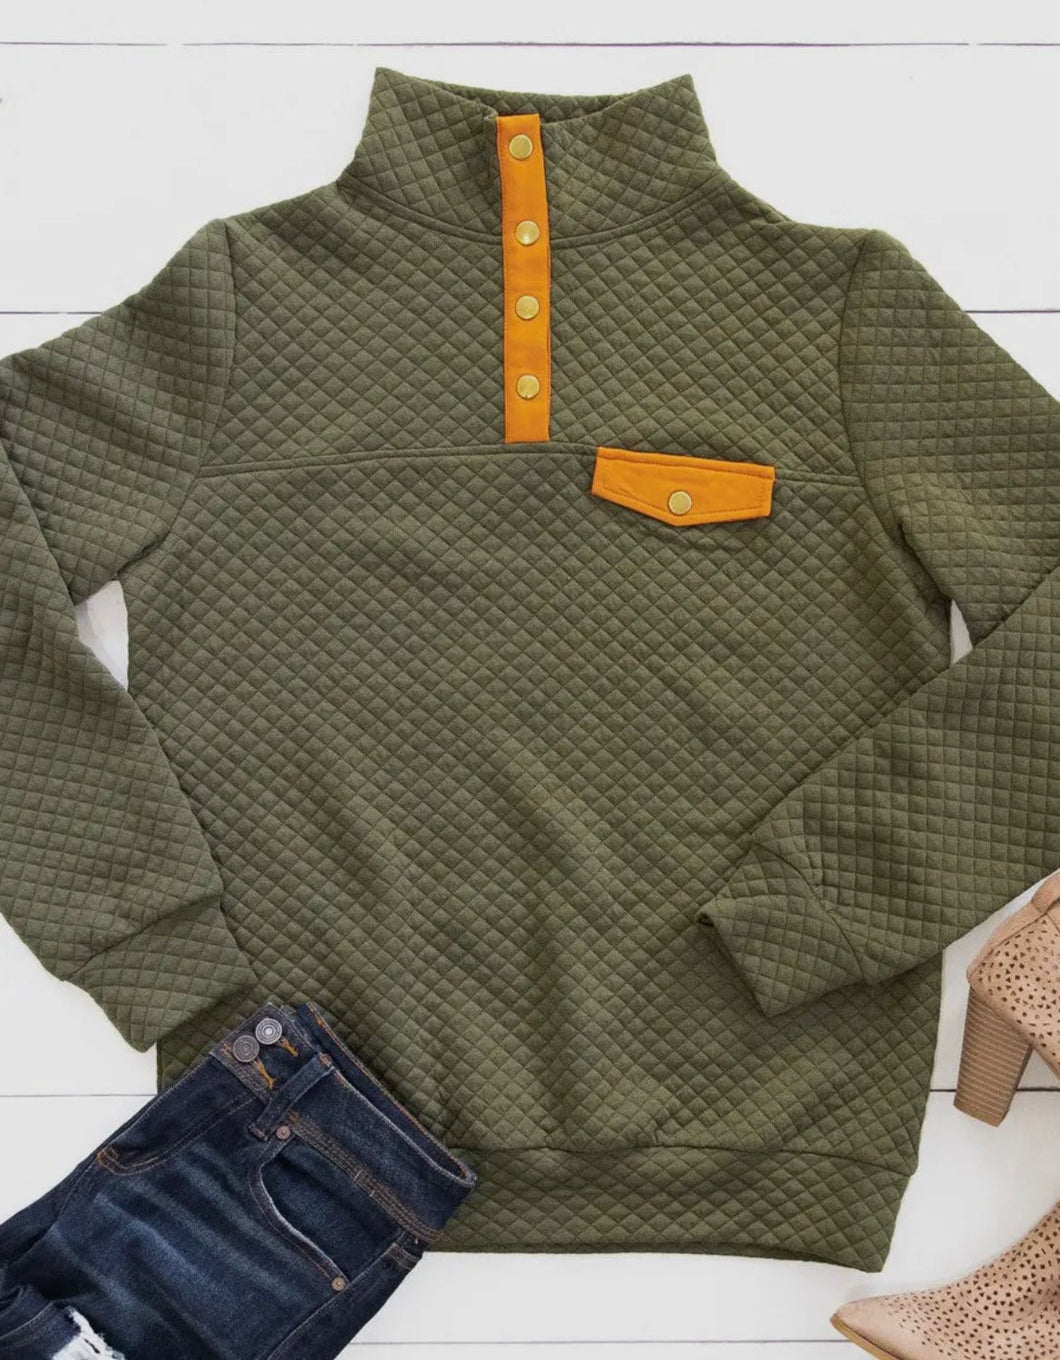 Olive Quilted Pullover XLarge